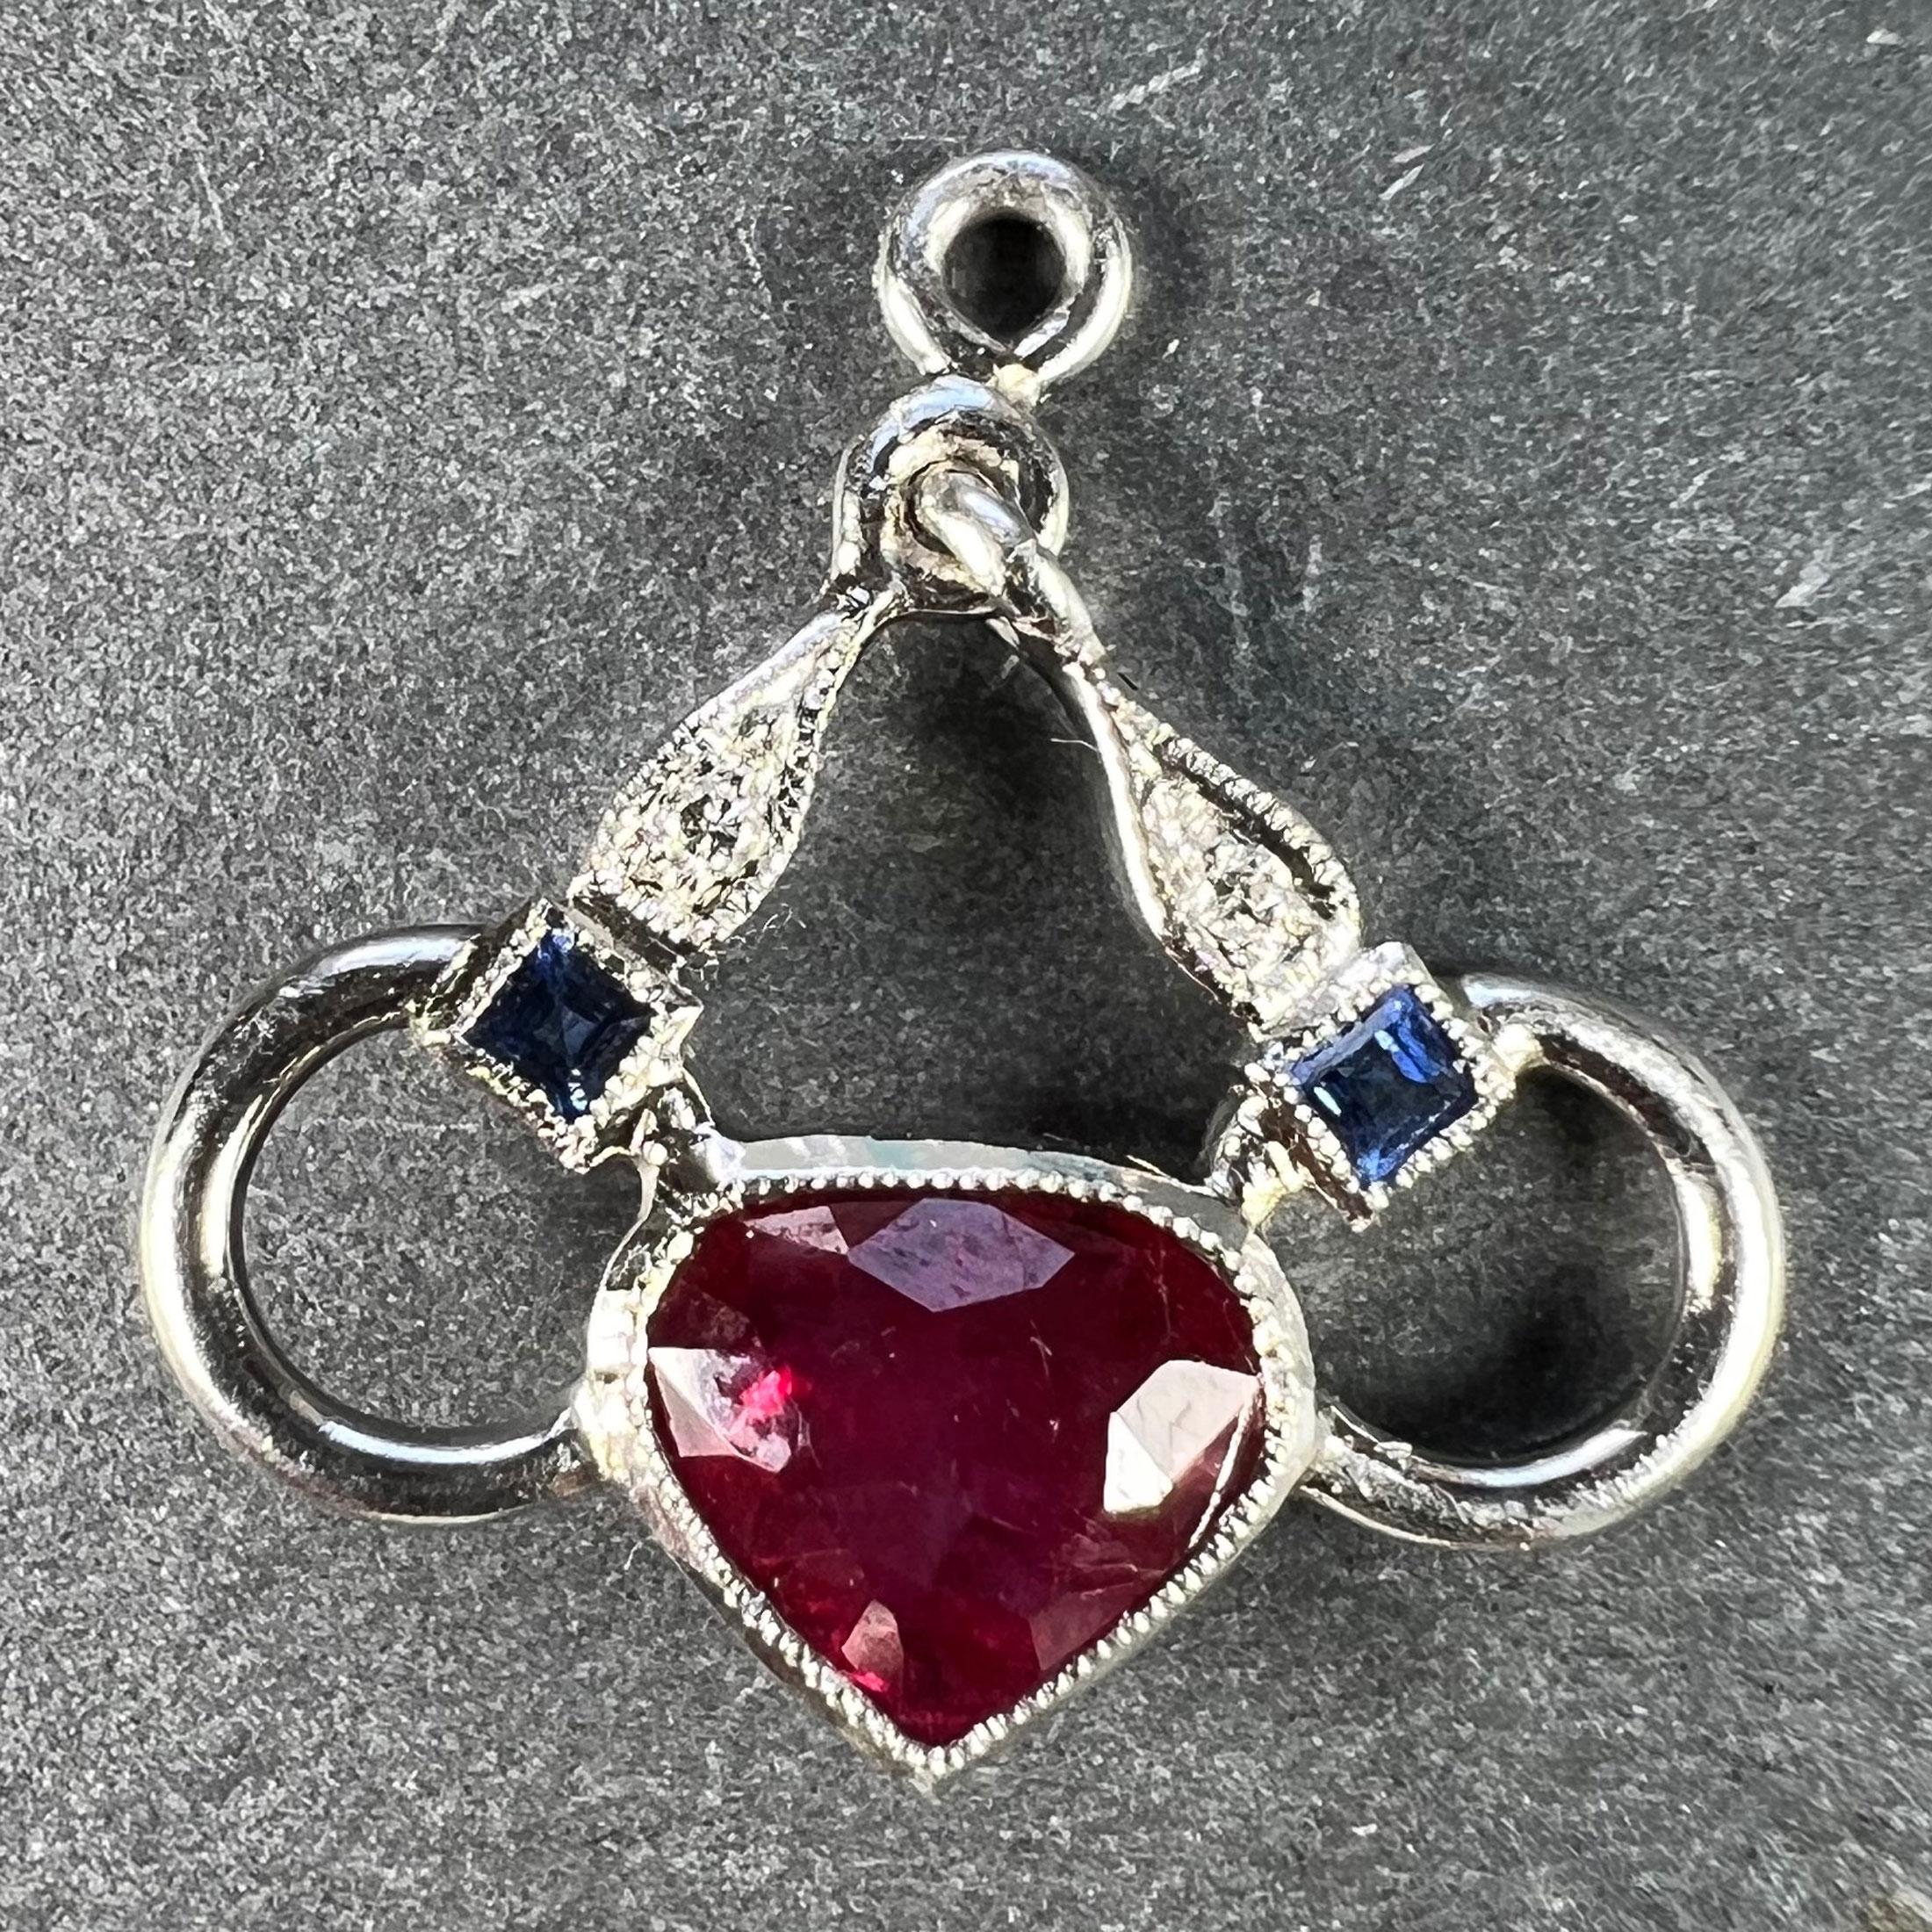 An Art Deco platinum charm pendant designed as a snaffle bit for horse riding with a ruby love heart and a sapphire and diamond set bit. The charm is set with a fracture-filled ruby heart, two round brilliant cut diamonds and two carre-cut